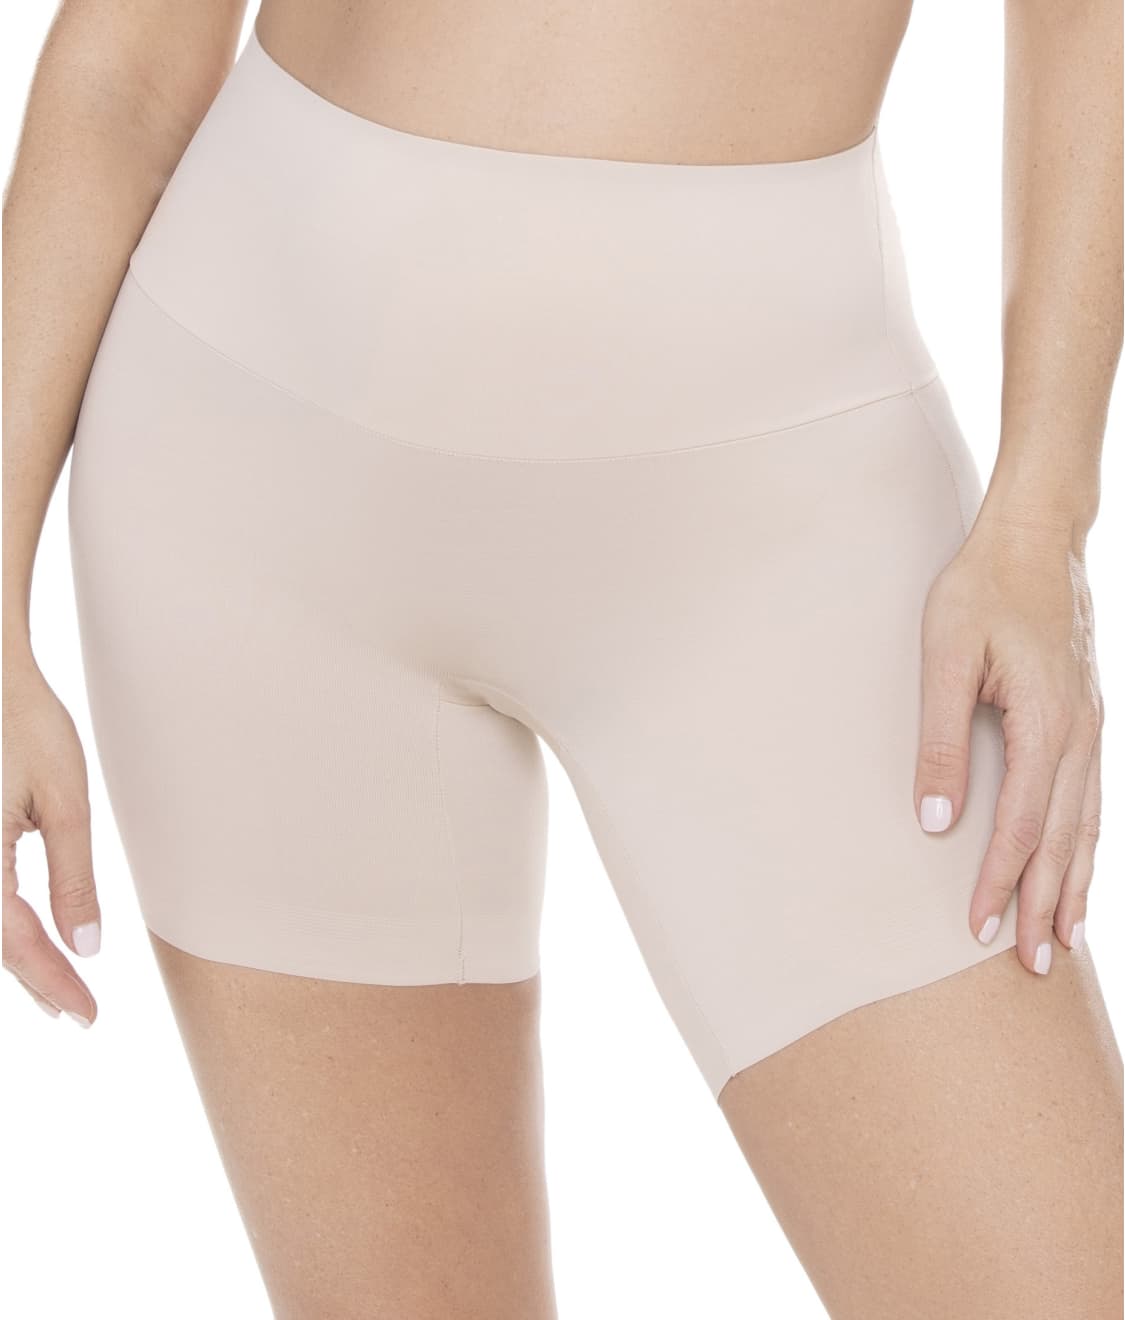 Miraclesuit: Comfy Curves Firm Control Bike Shorts 2518